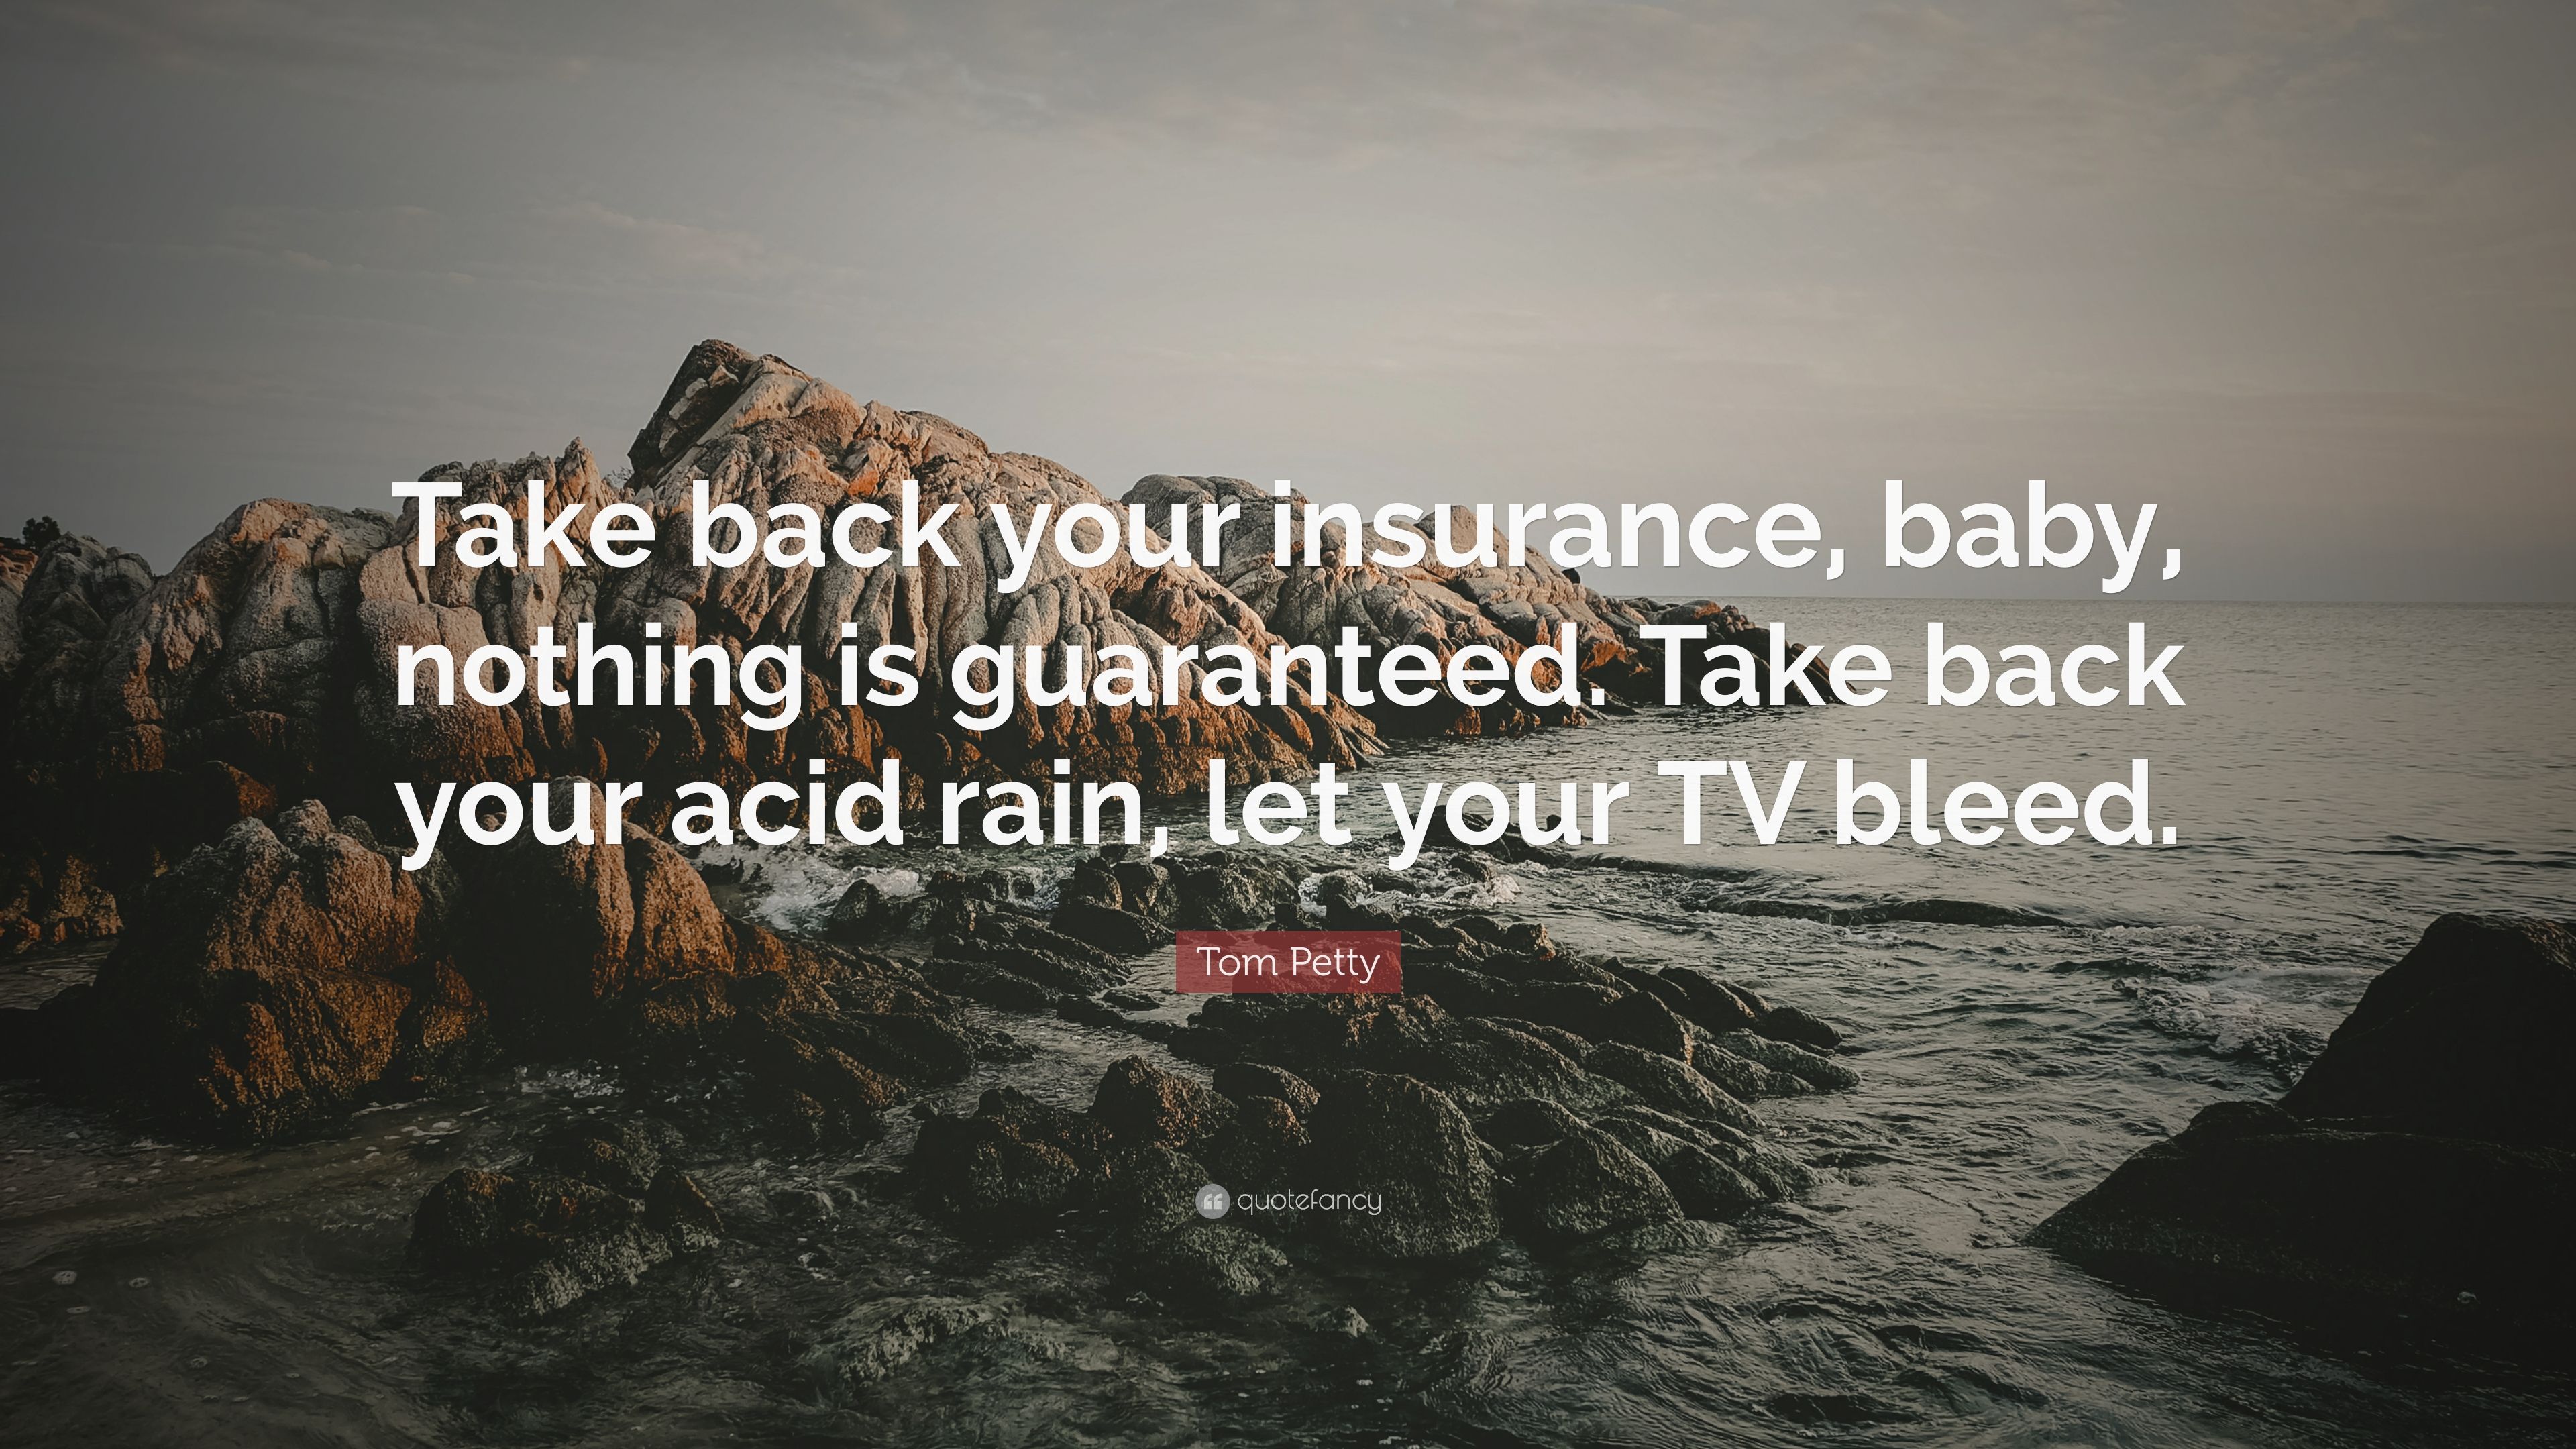 Tom Petty Quote: “Take back your insurance, baby, nothing is guaranteed. Take back your acid rain, let your TV bleed.” (7 wallpaper)